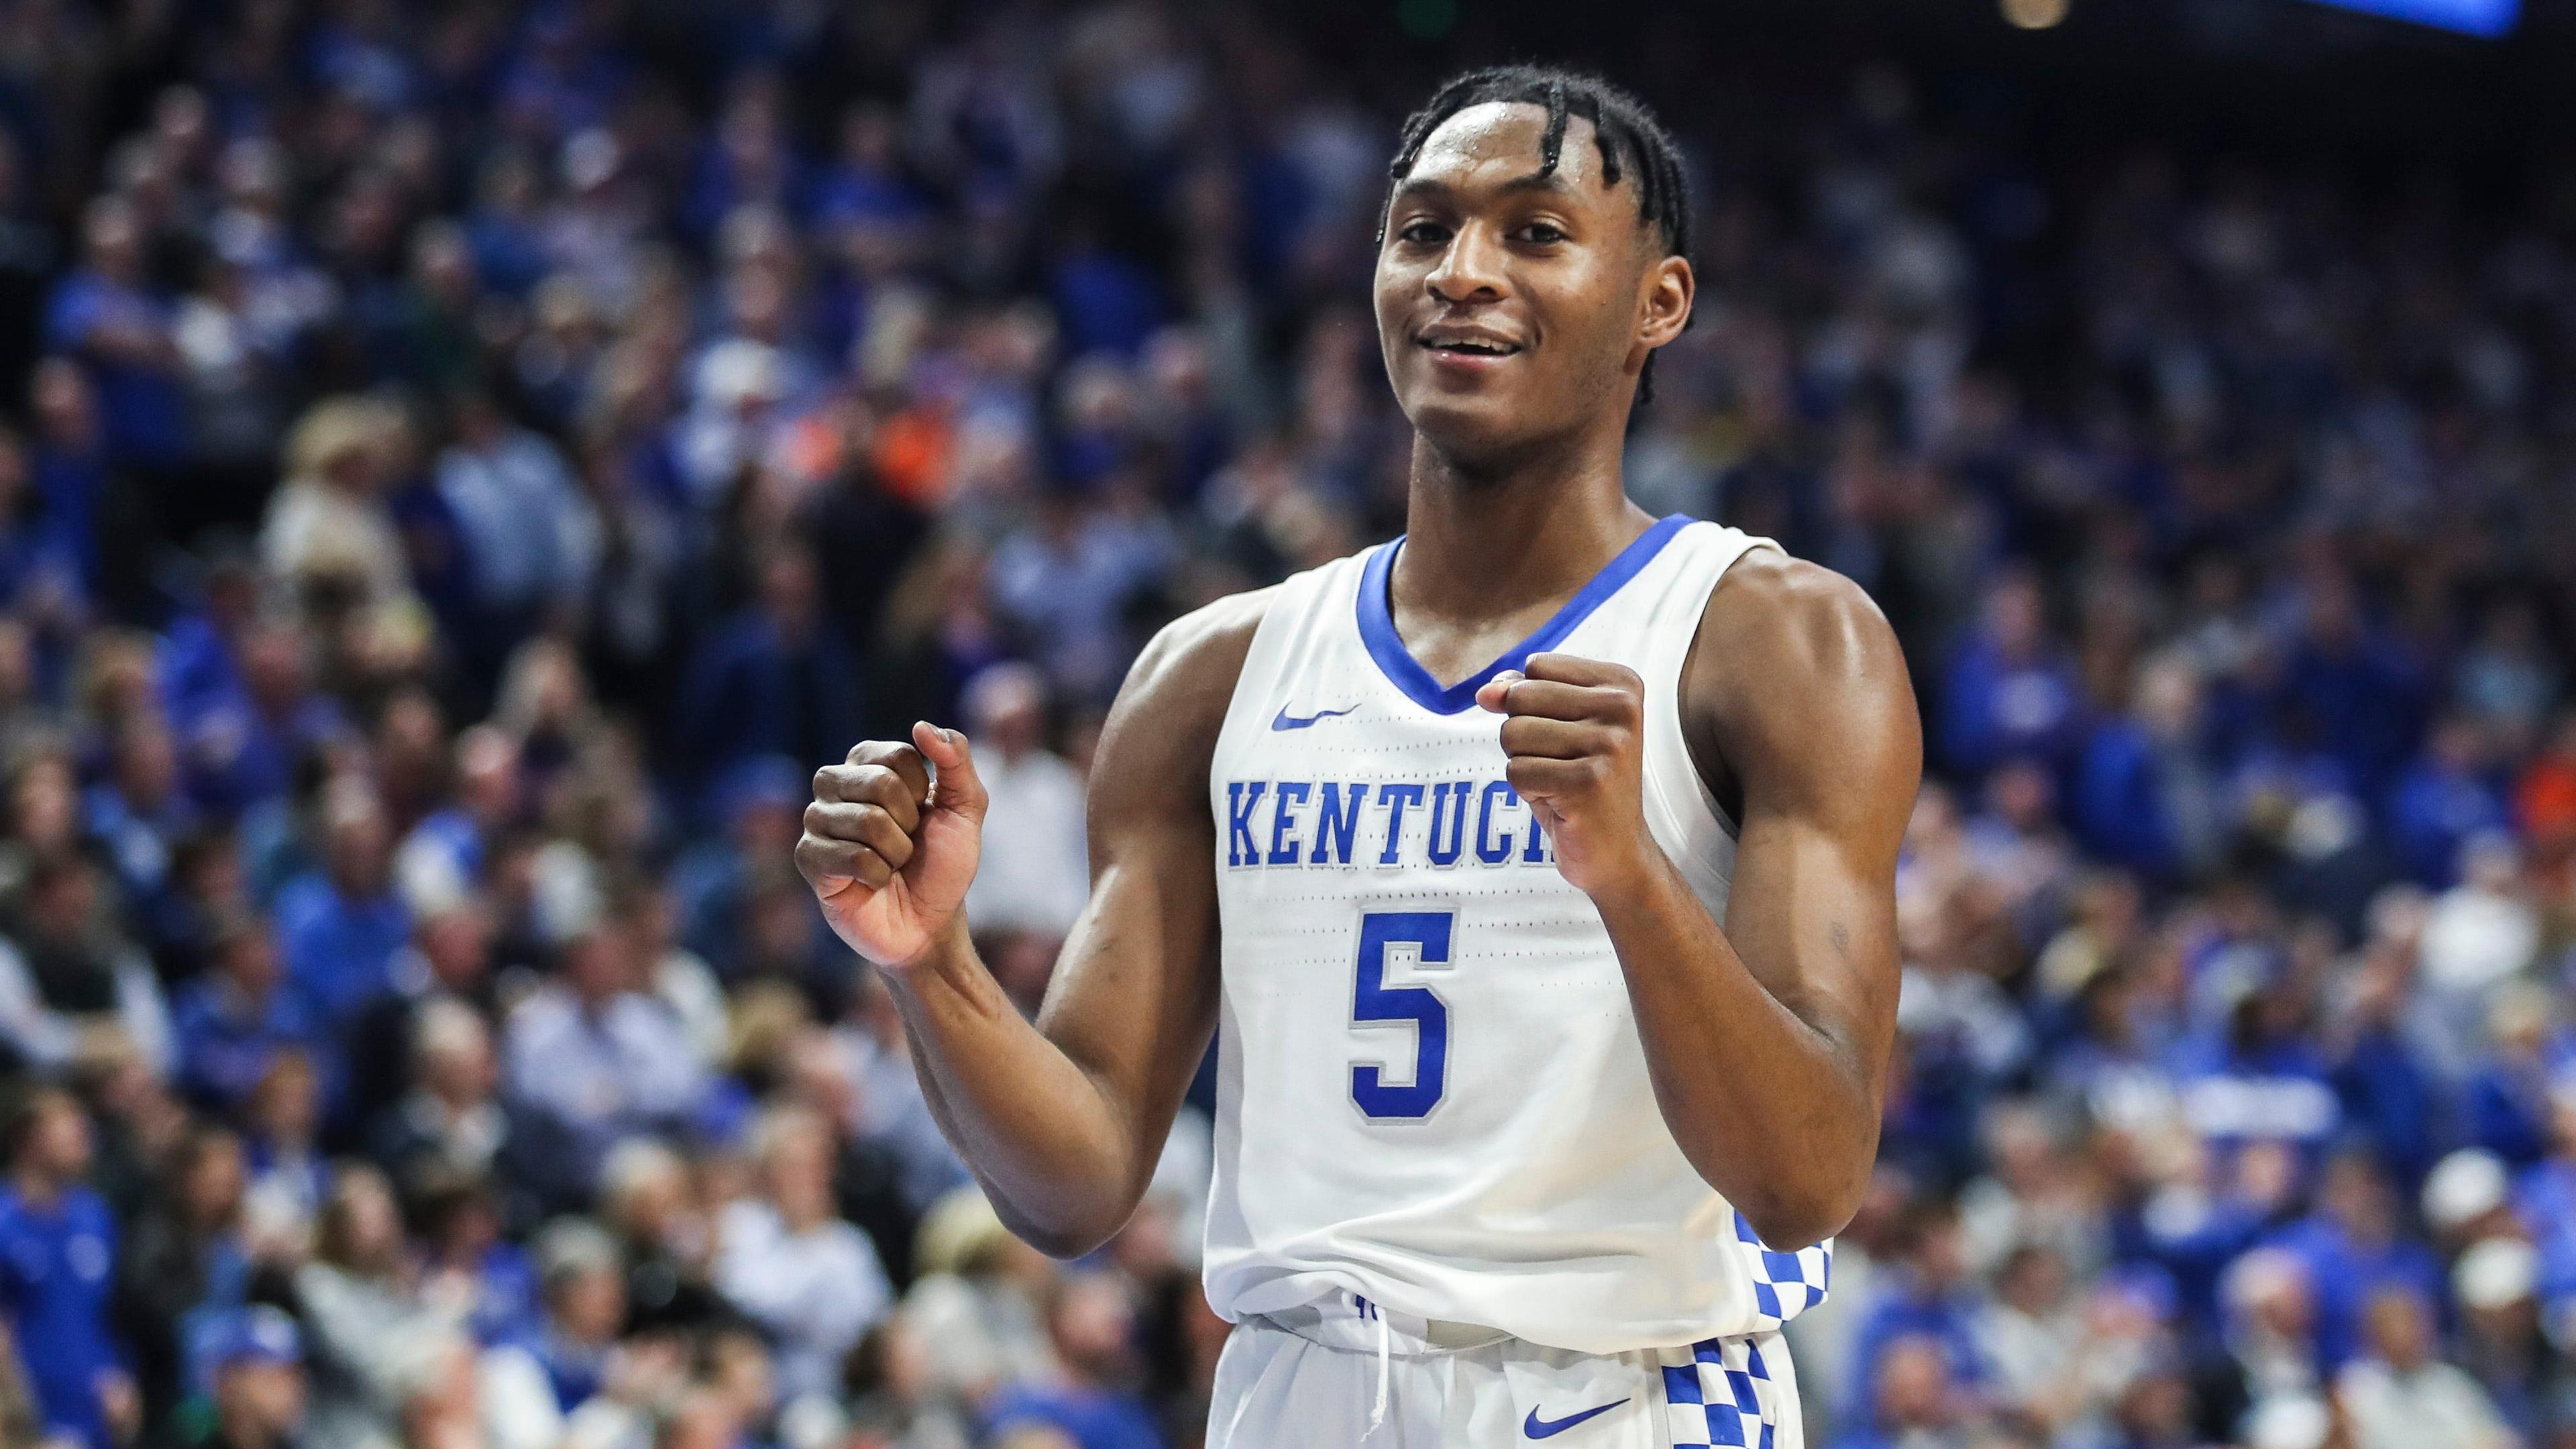 Immanuel Quickley soaks in the Wildcat win over Florida Saturday night. / Matt Stone/Courier Journal, Courier Journal via Imagn Content Services, LLC